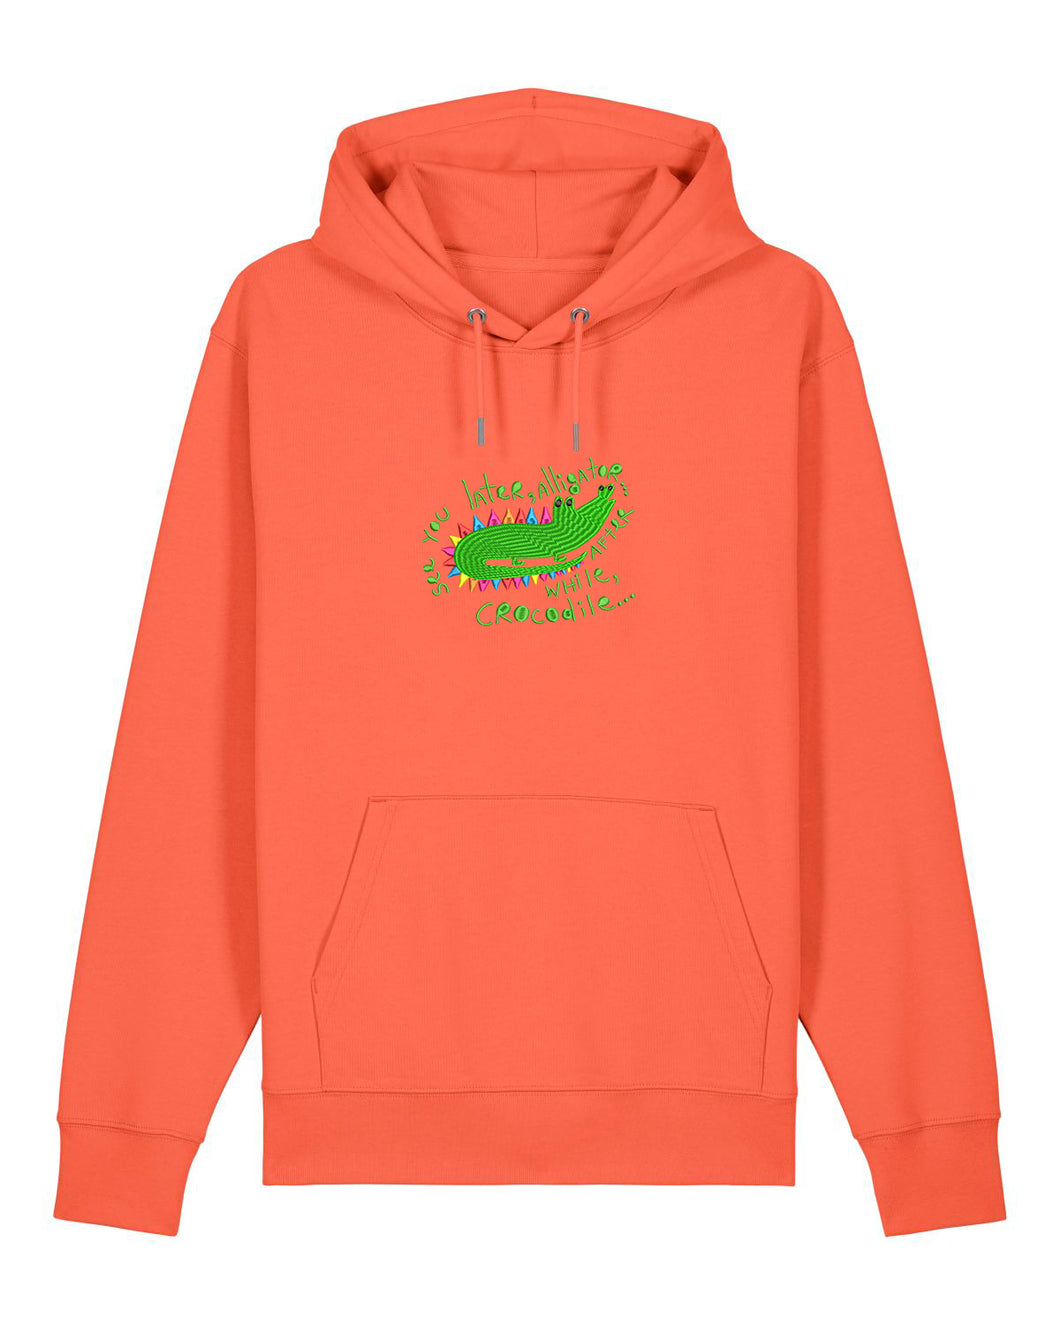 See you later, alligator...🐊 Embroidered UNISEX hoodie